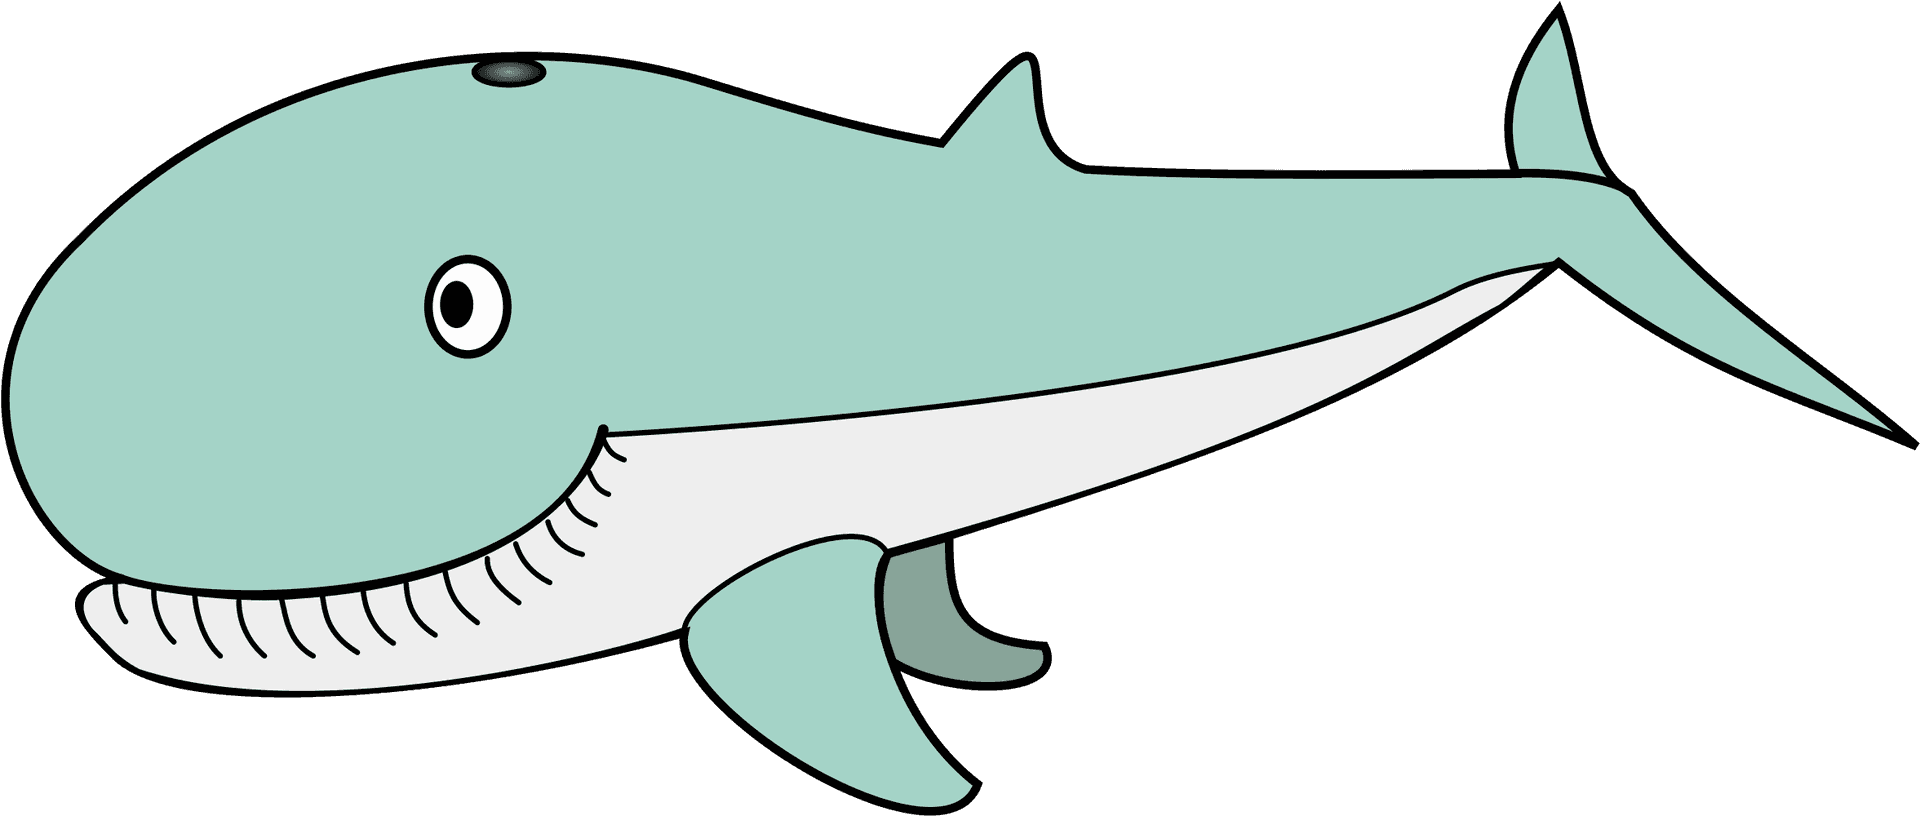 Cartoon Whale Illustration PNG